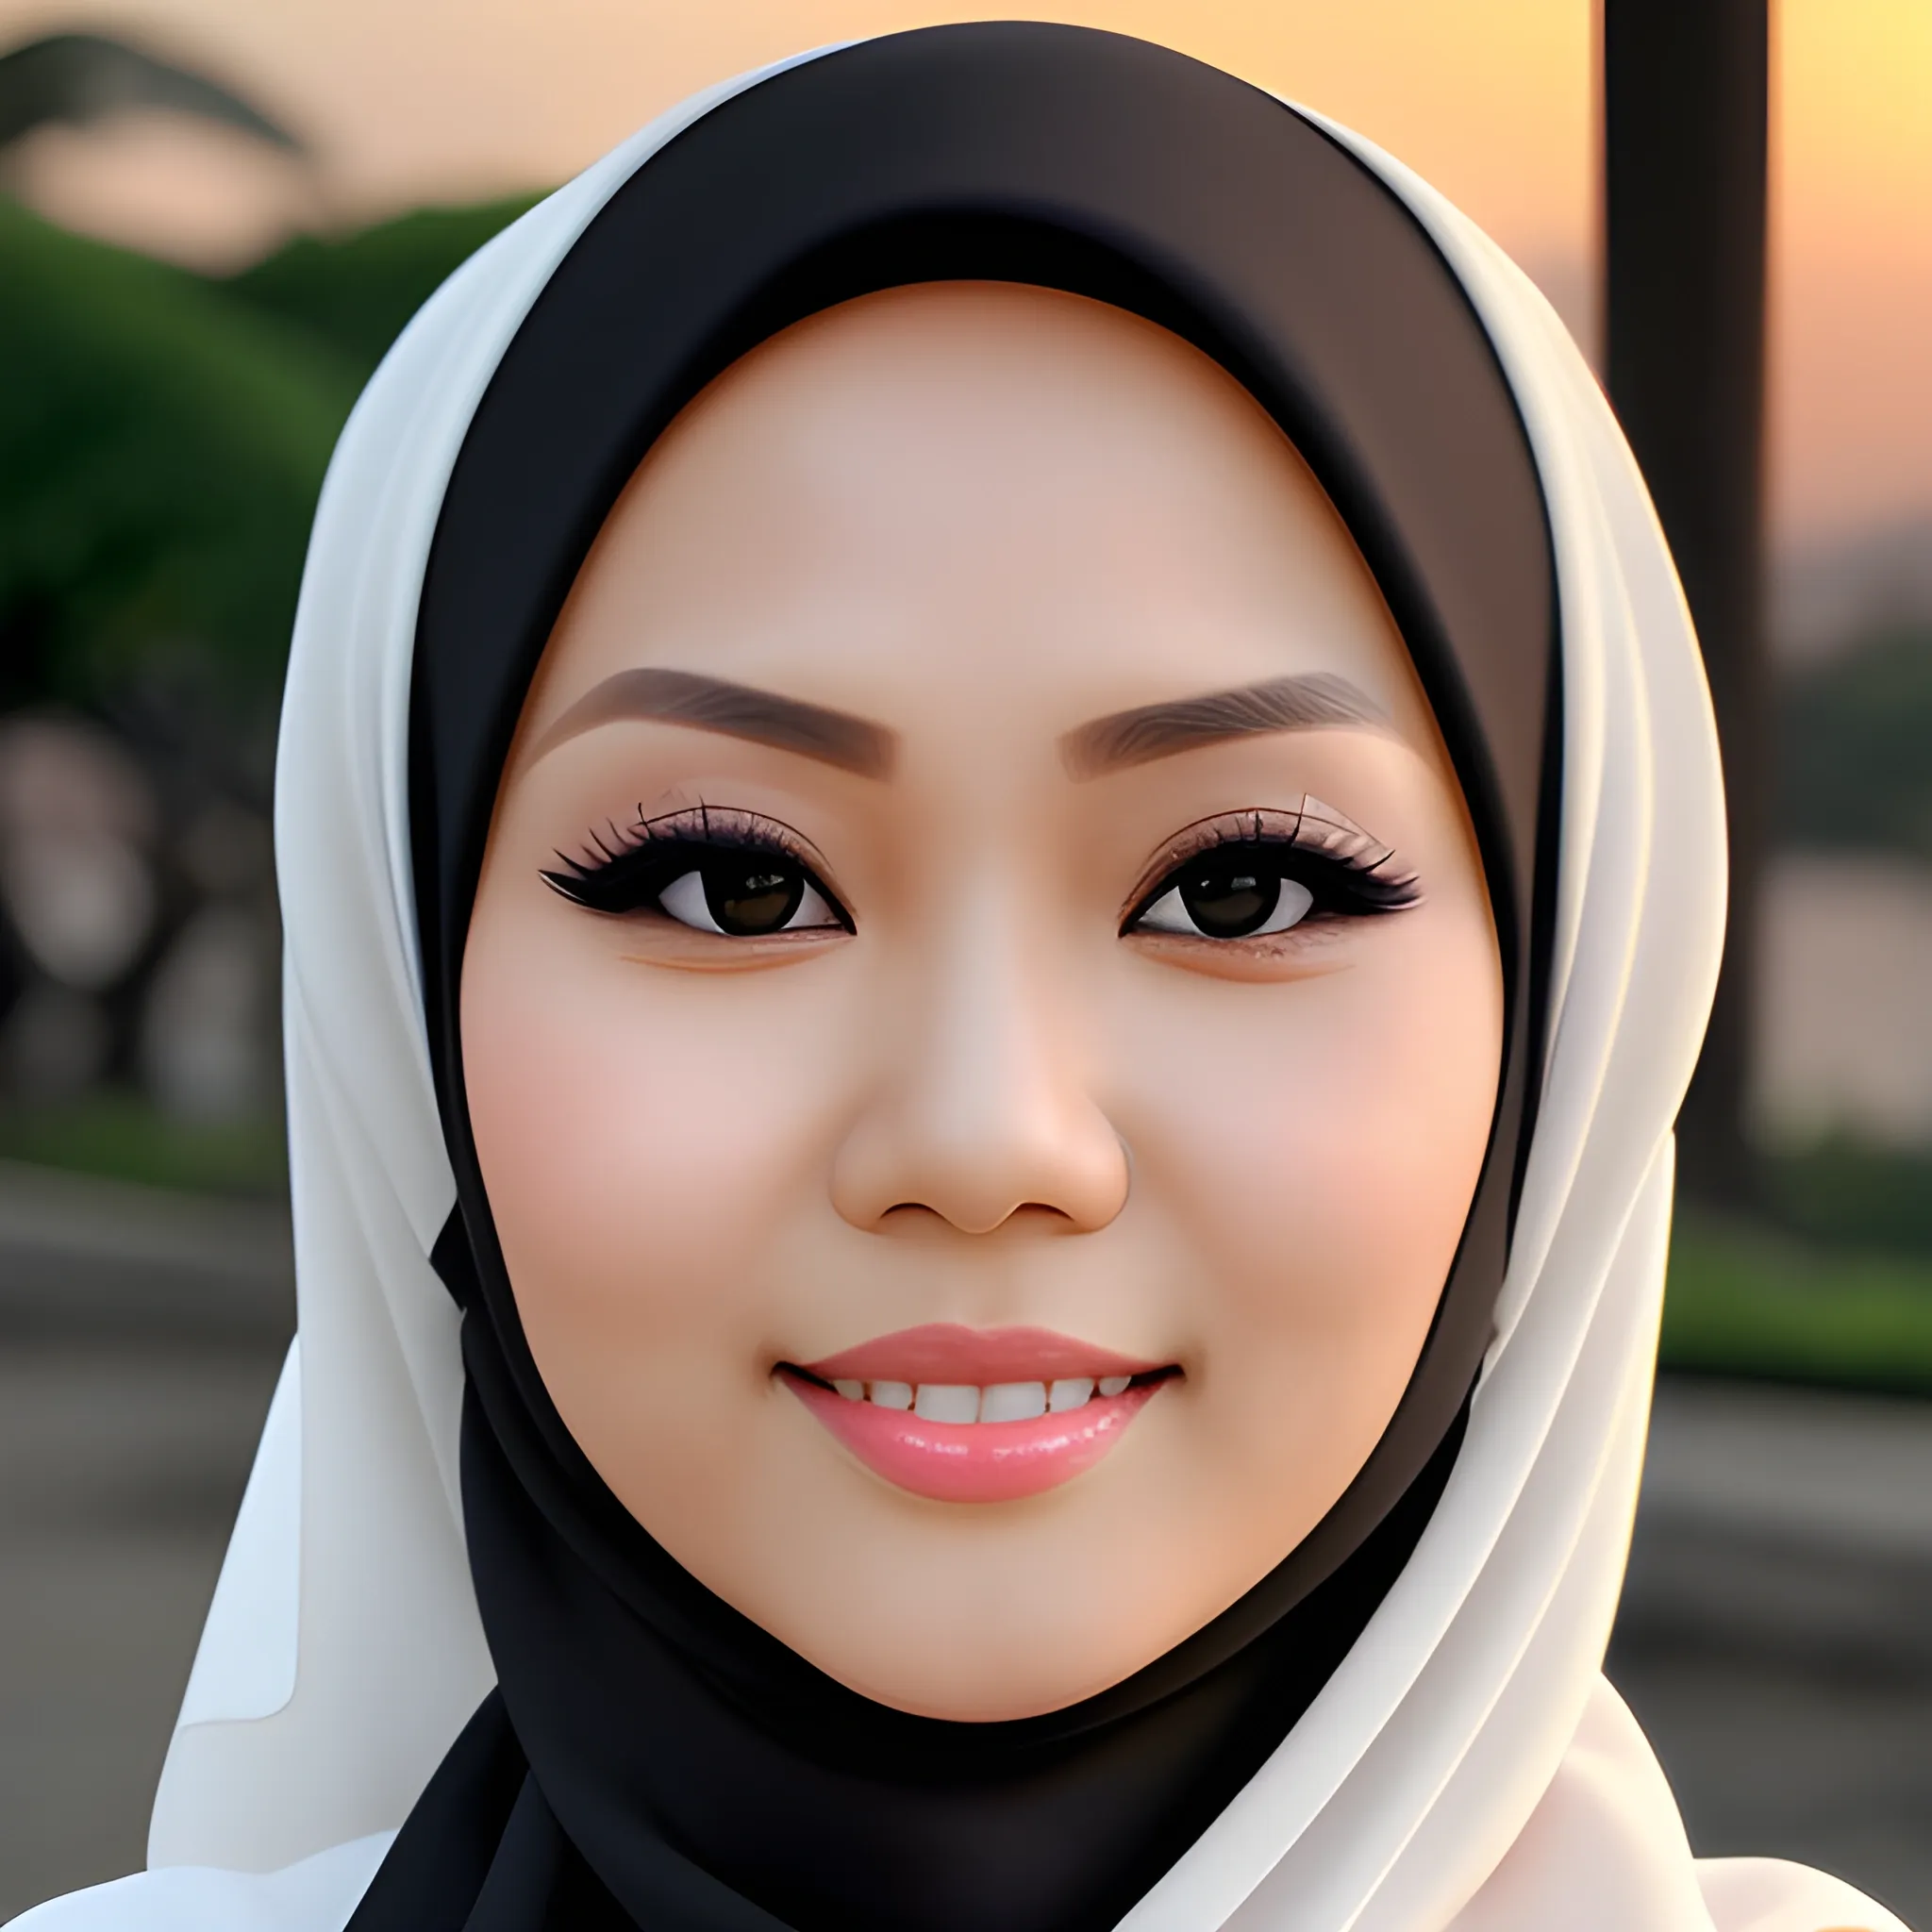 pretty women indonesian, elegant, happy, face detail, sharp nose, black eyes, wearing black hijab, white blouse casual, in the Sunrise, her eyes looking at camera, 4k